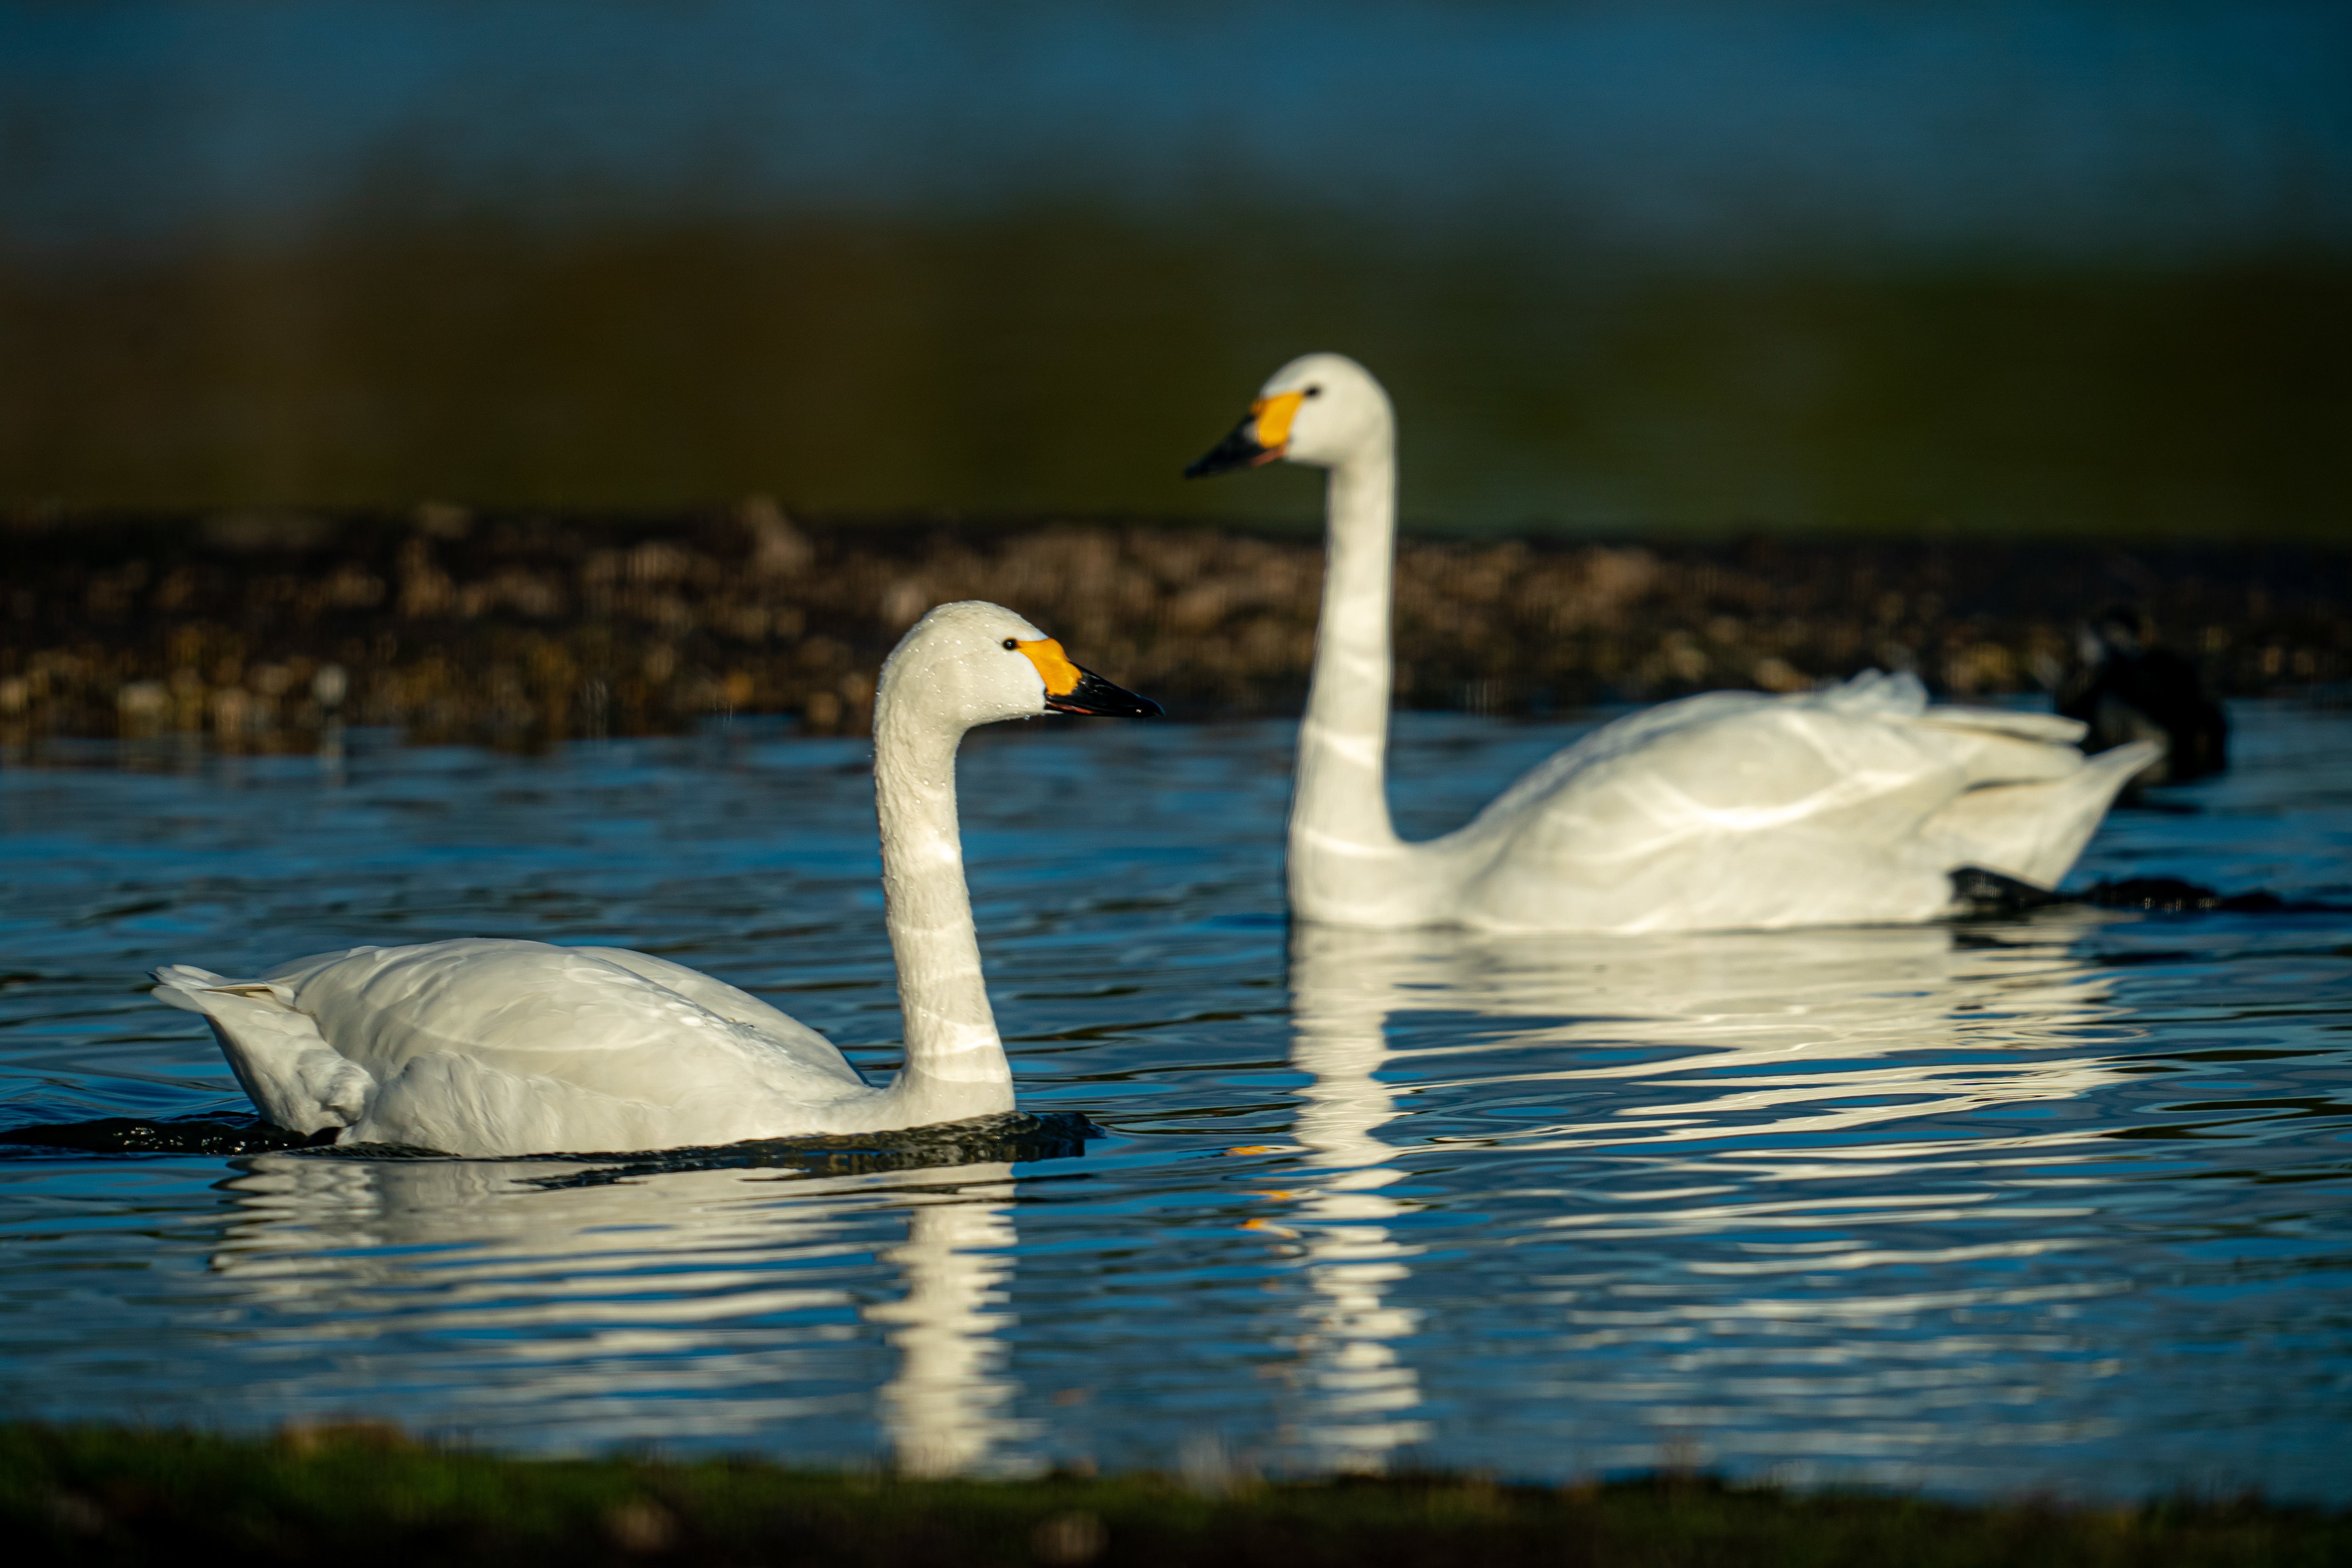 Bewick's Swans arrive at Slimbridge Wetland Centre, Gloucestershire, after a 3,500Km migration flight across Europe from nesting spots in Siberia, to spend winter in the UK